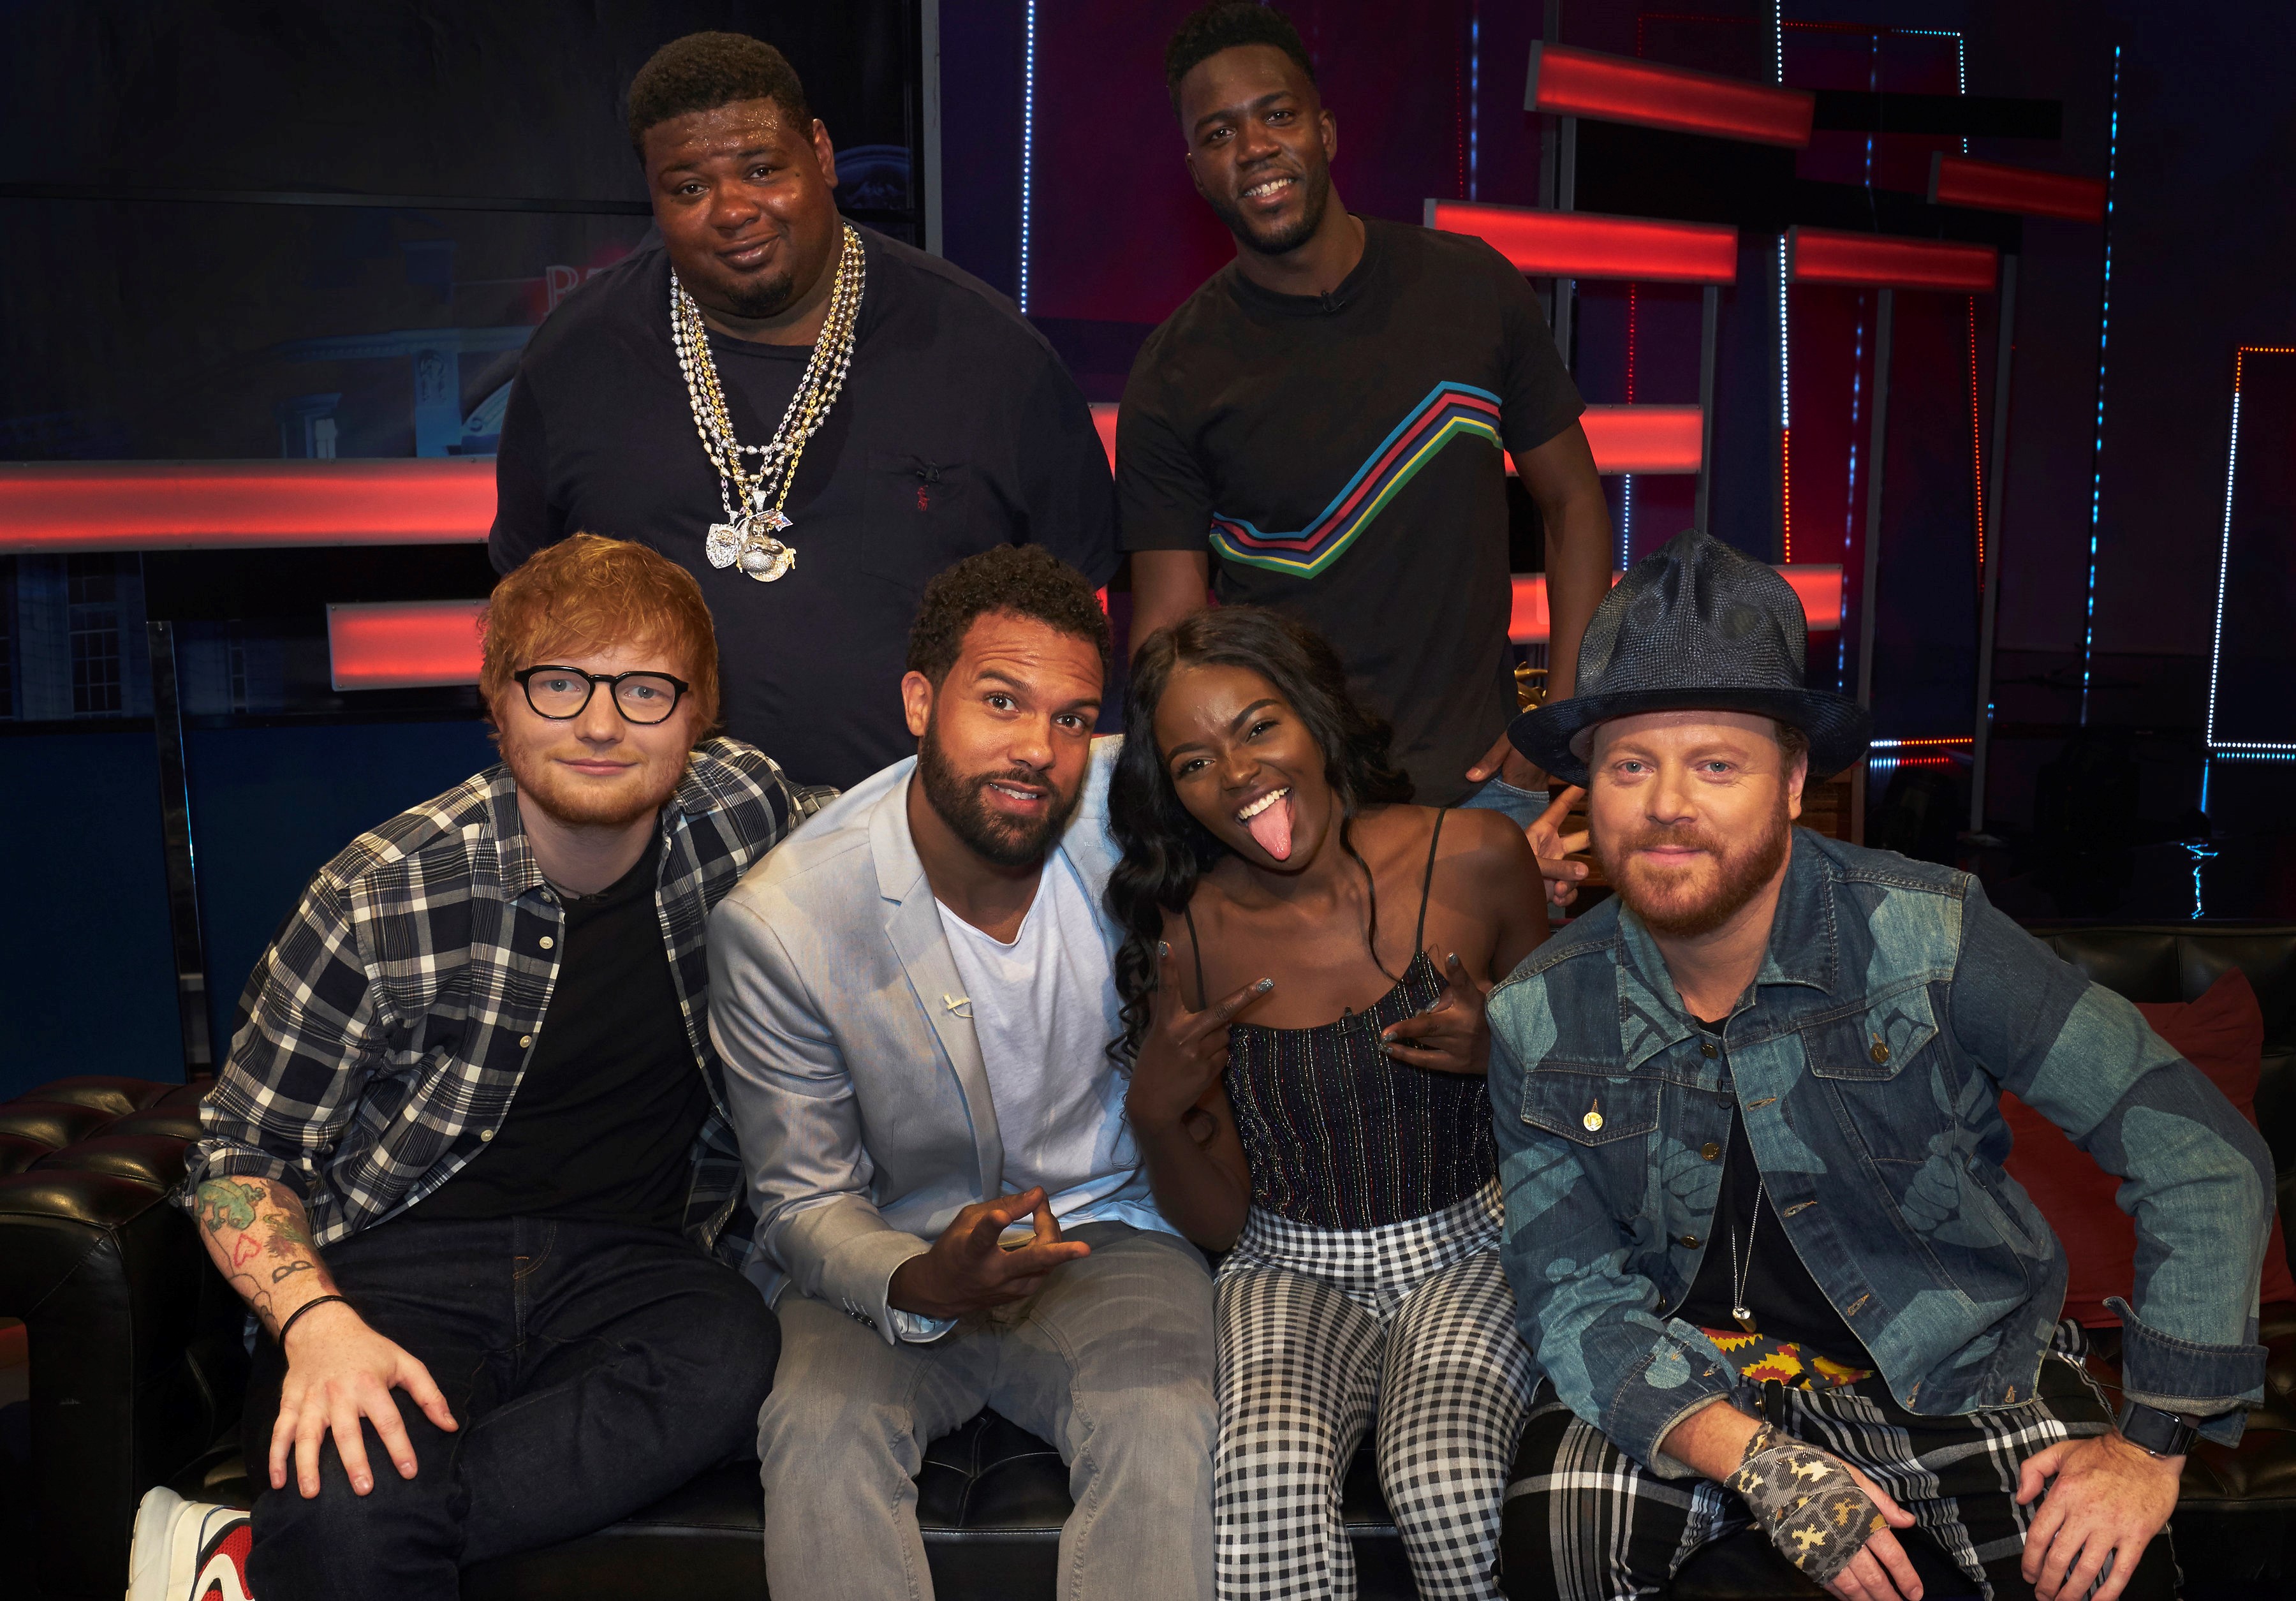 Ed Sheeran, O.T. Fagbenle, Sherrie Silver and Keith Lemon on The Big Narstie Show with hosts Big Narstie and Mo Gilligan